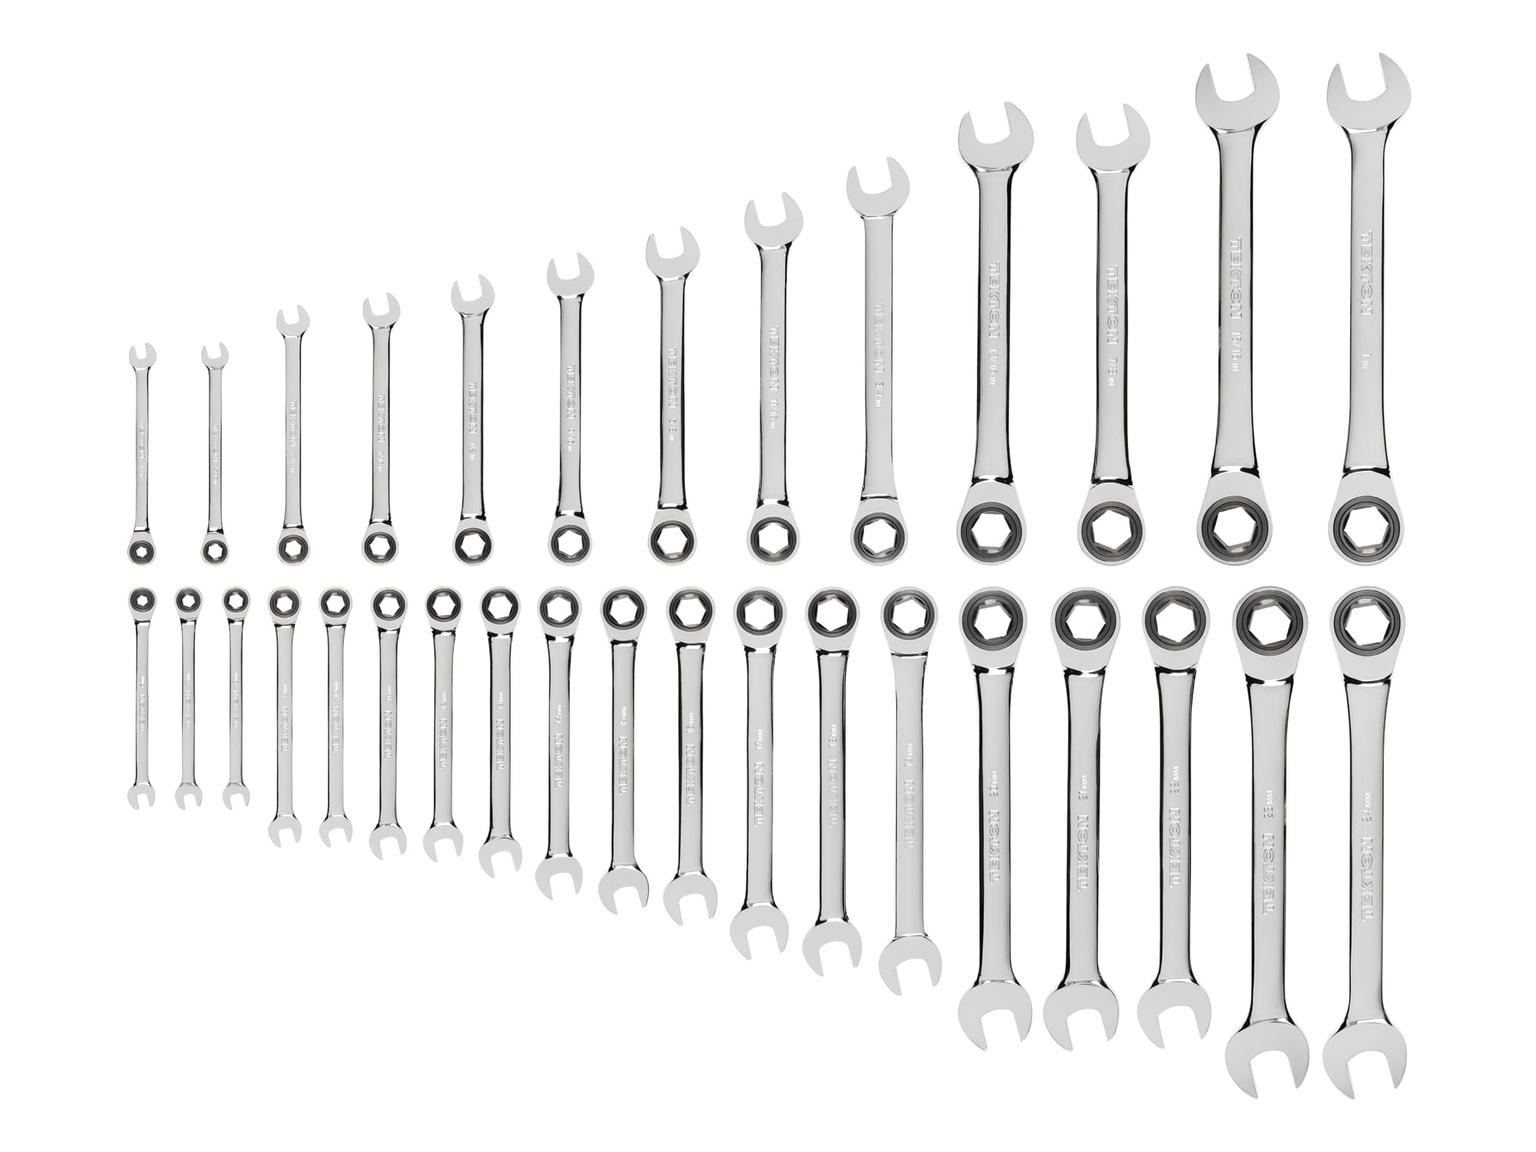 TEKTON WRN53303-T Ratcheting Combination Wrench Set, 32-Piece (1/4 - 1 in., 6-24 mm)